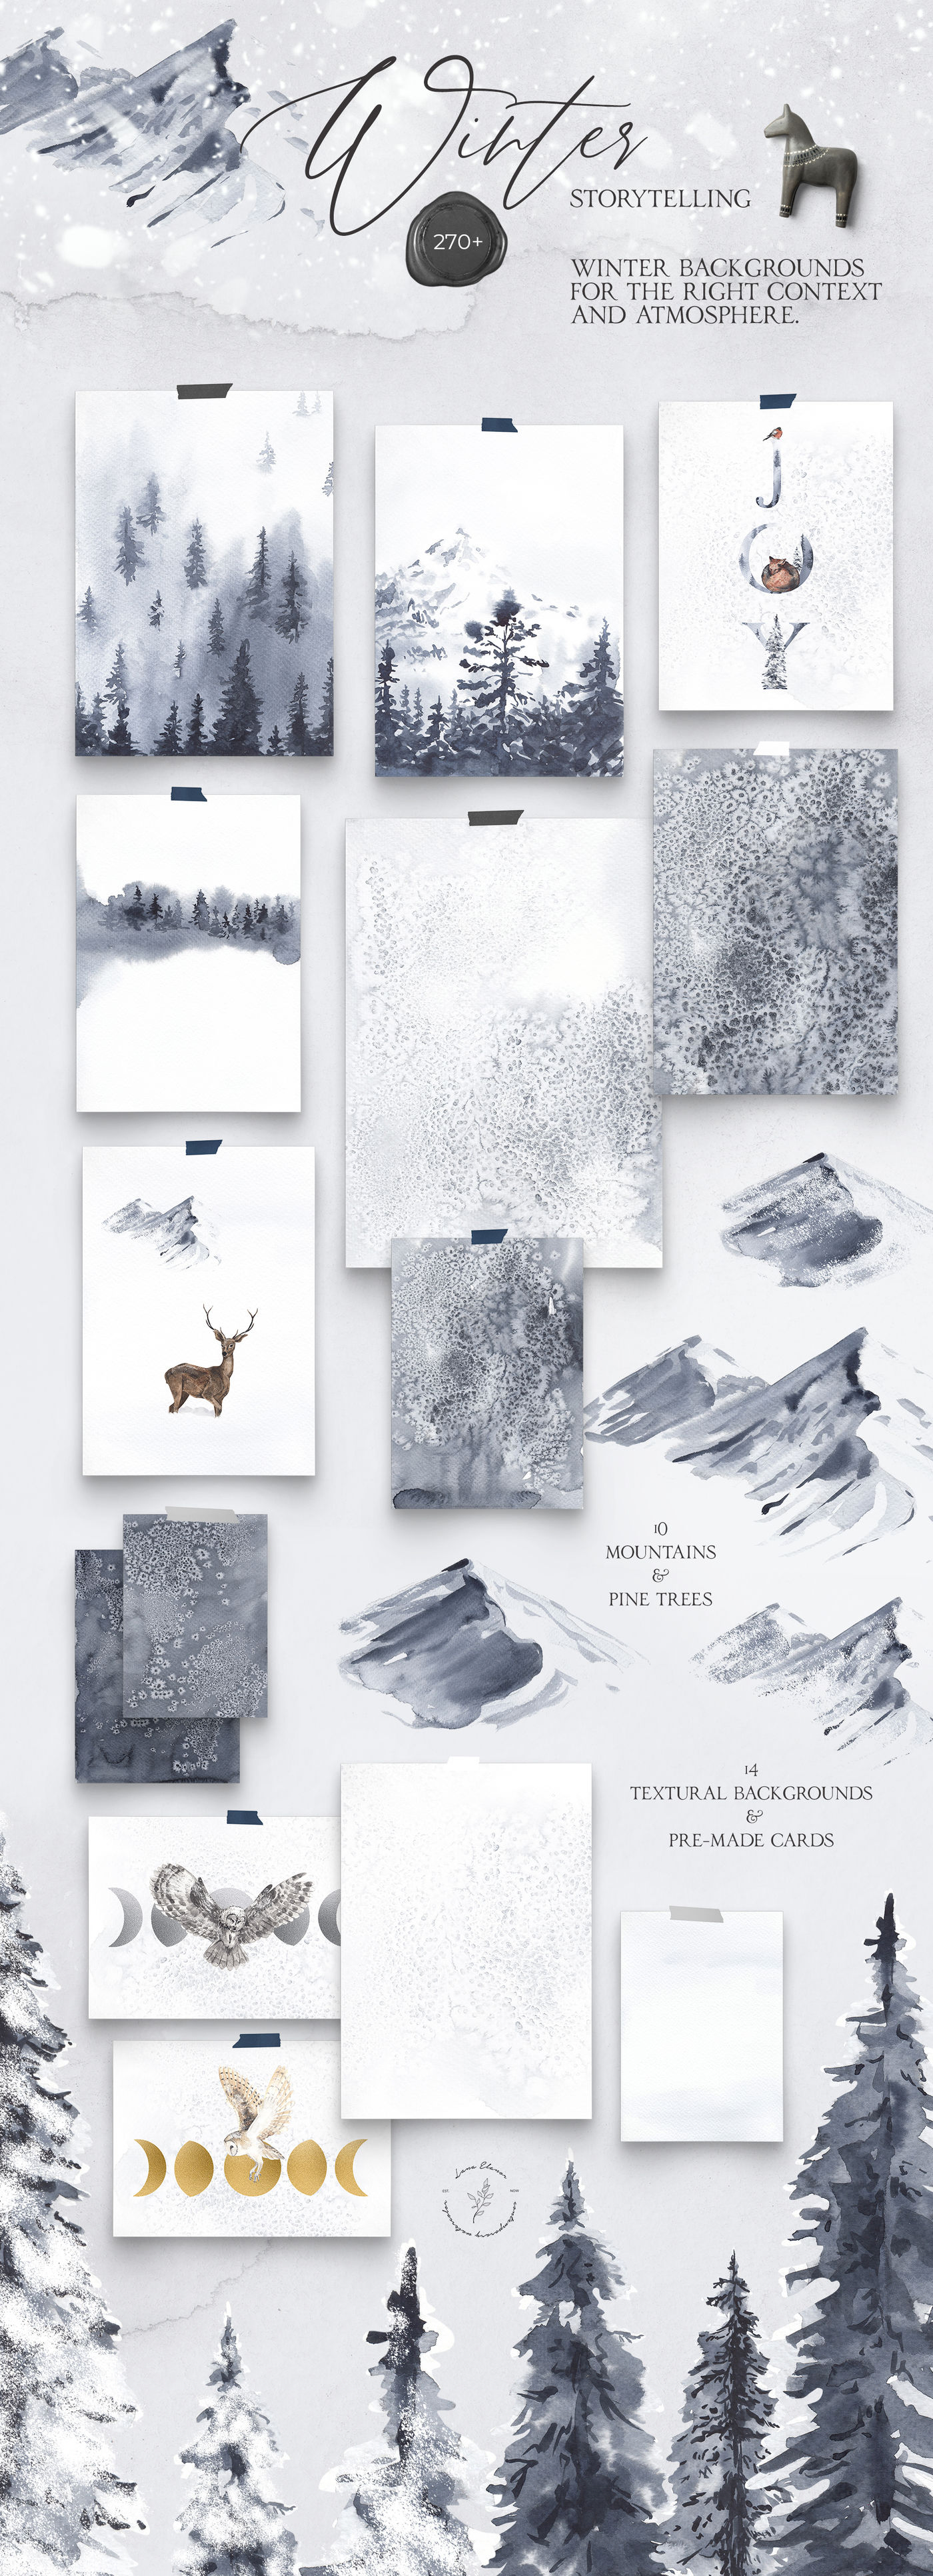 Winter Storytelling Christmas Watercolor Collection By Lana Elanor Thehungryjpeg Com